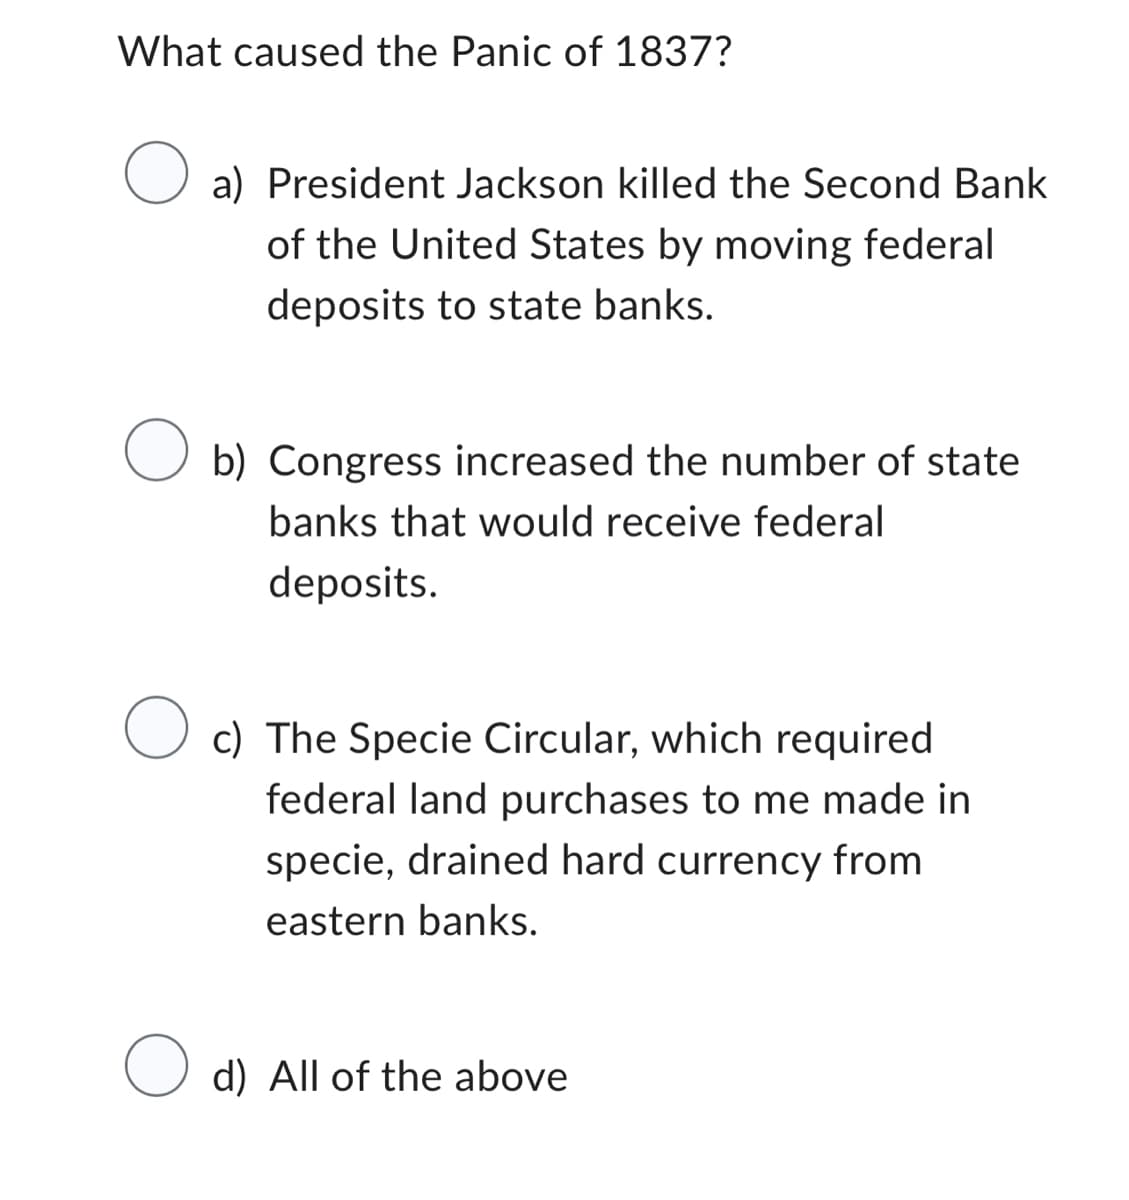 What caused the Panic of 1837?
a) President Jackson killed the Second Bank
of the United States by moving federal
deposits to state banks.
O b) Congress increased the number of state
banks that would receive federal
deposits.
O
c)
The Specie Circular, which required
federal land purchases to me made in
specie, drained hard currency from
eastern banks.
O d) All of the above